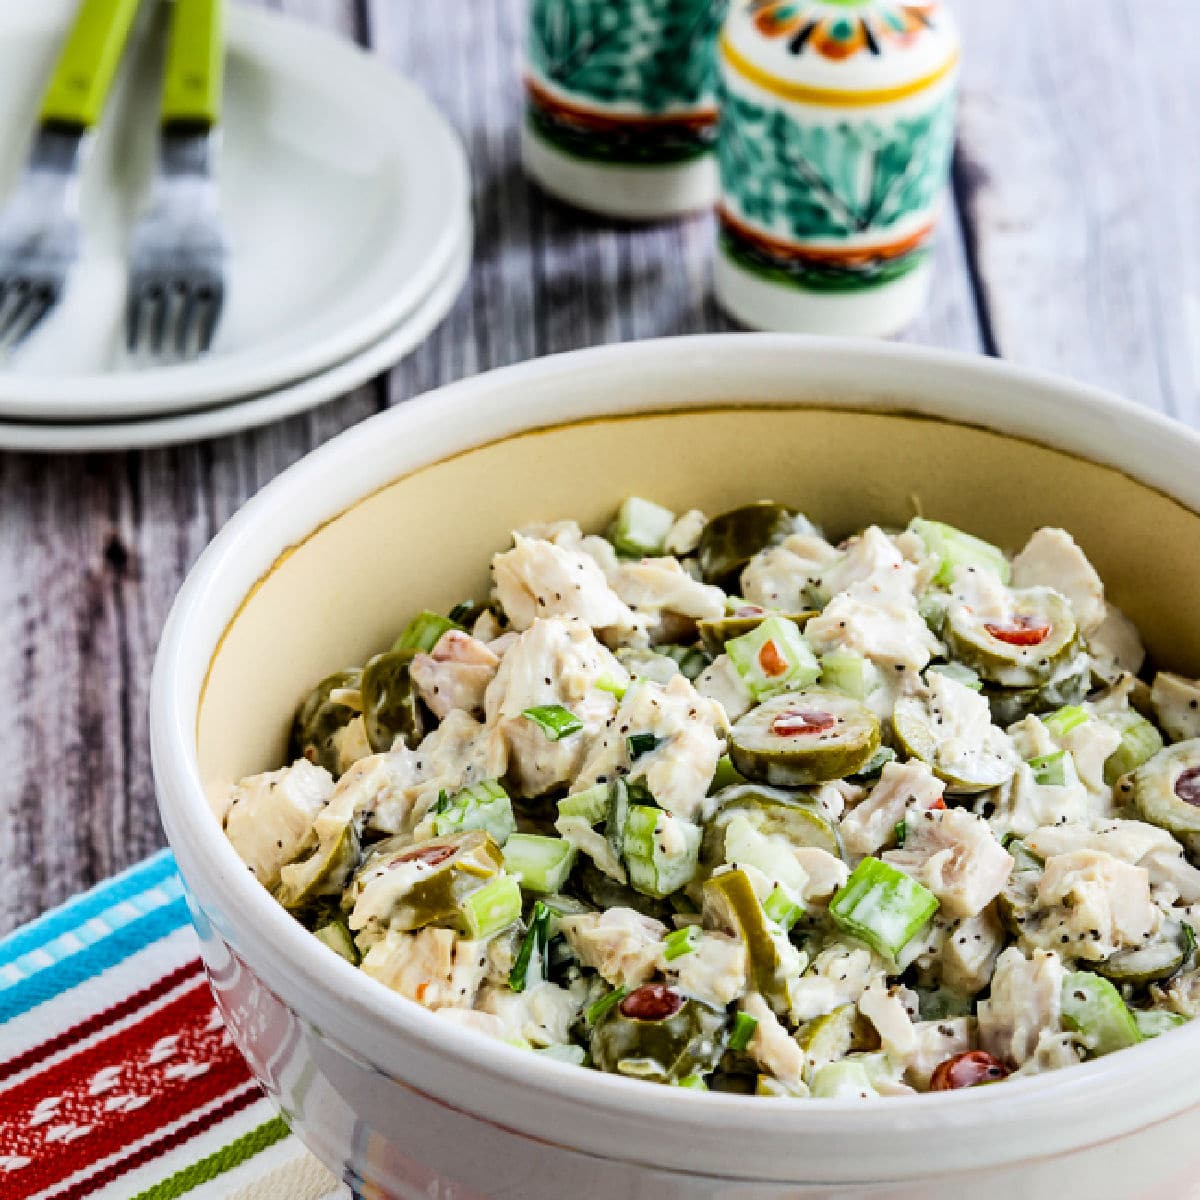 Square image of Chicken Salad with Green Olives shown in large serving bowl.